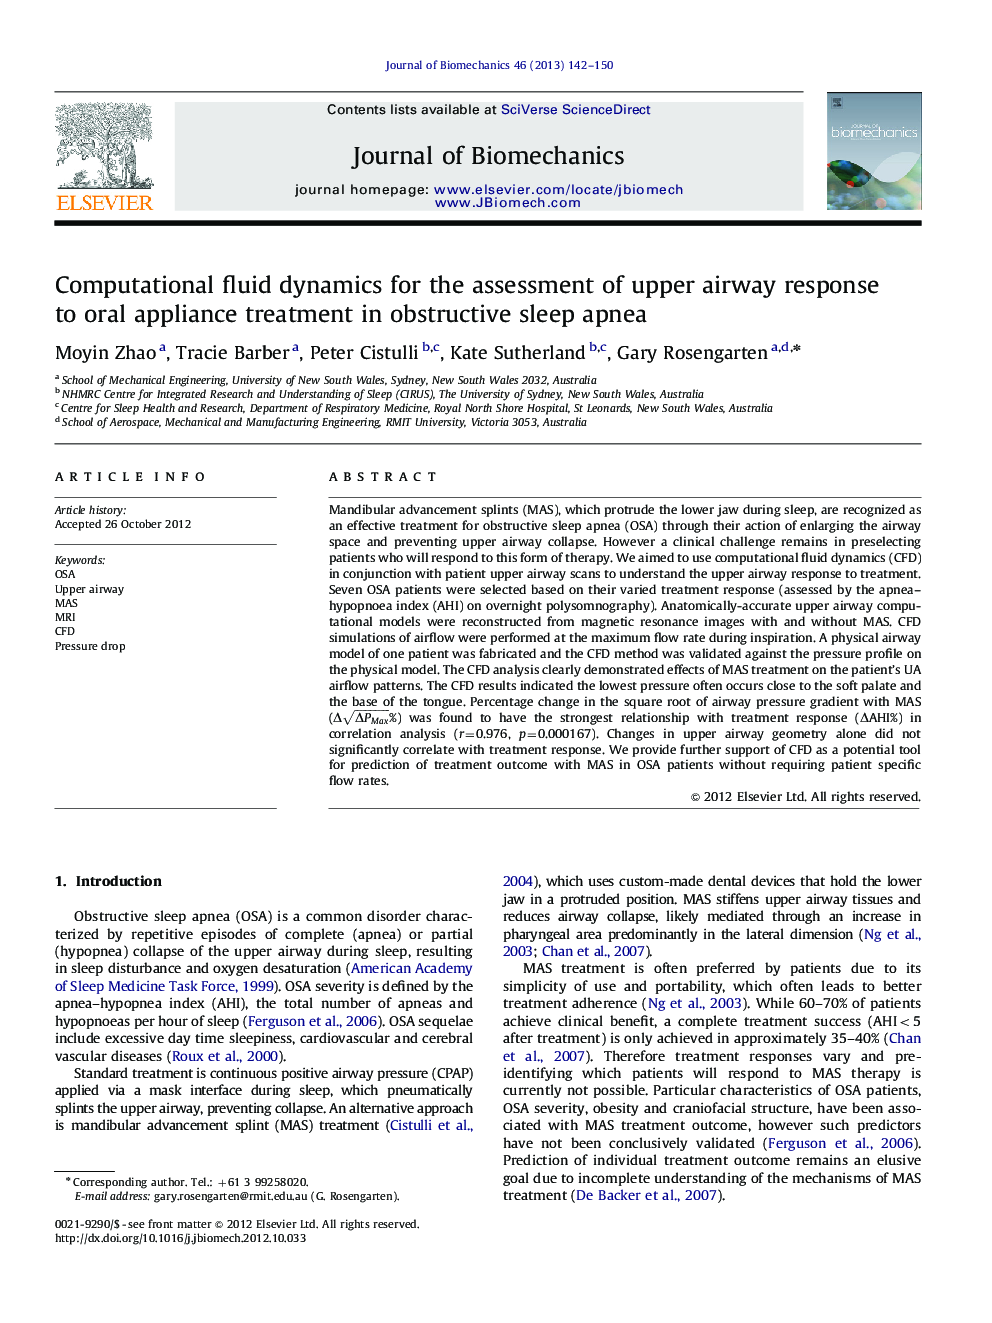 Computational fluid dynamics for the assessment of upper airway response to oral appliance treatment in obstructive sleep apnea